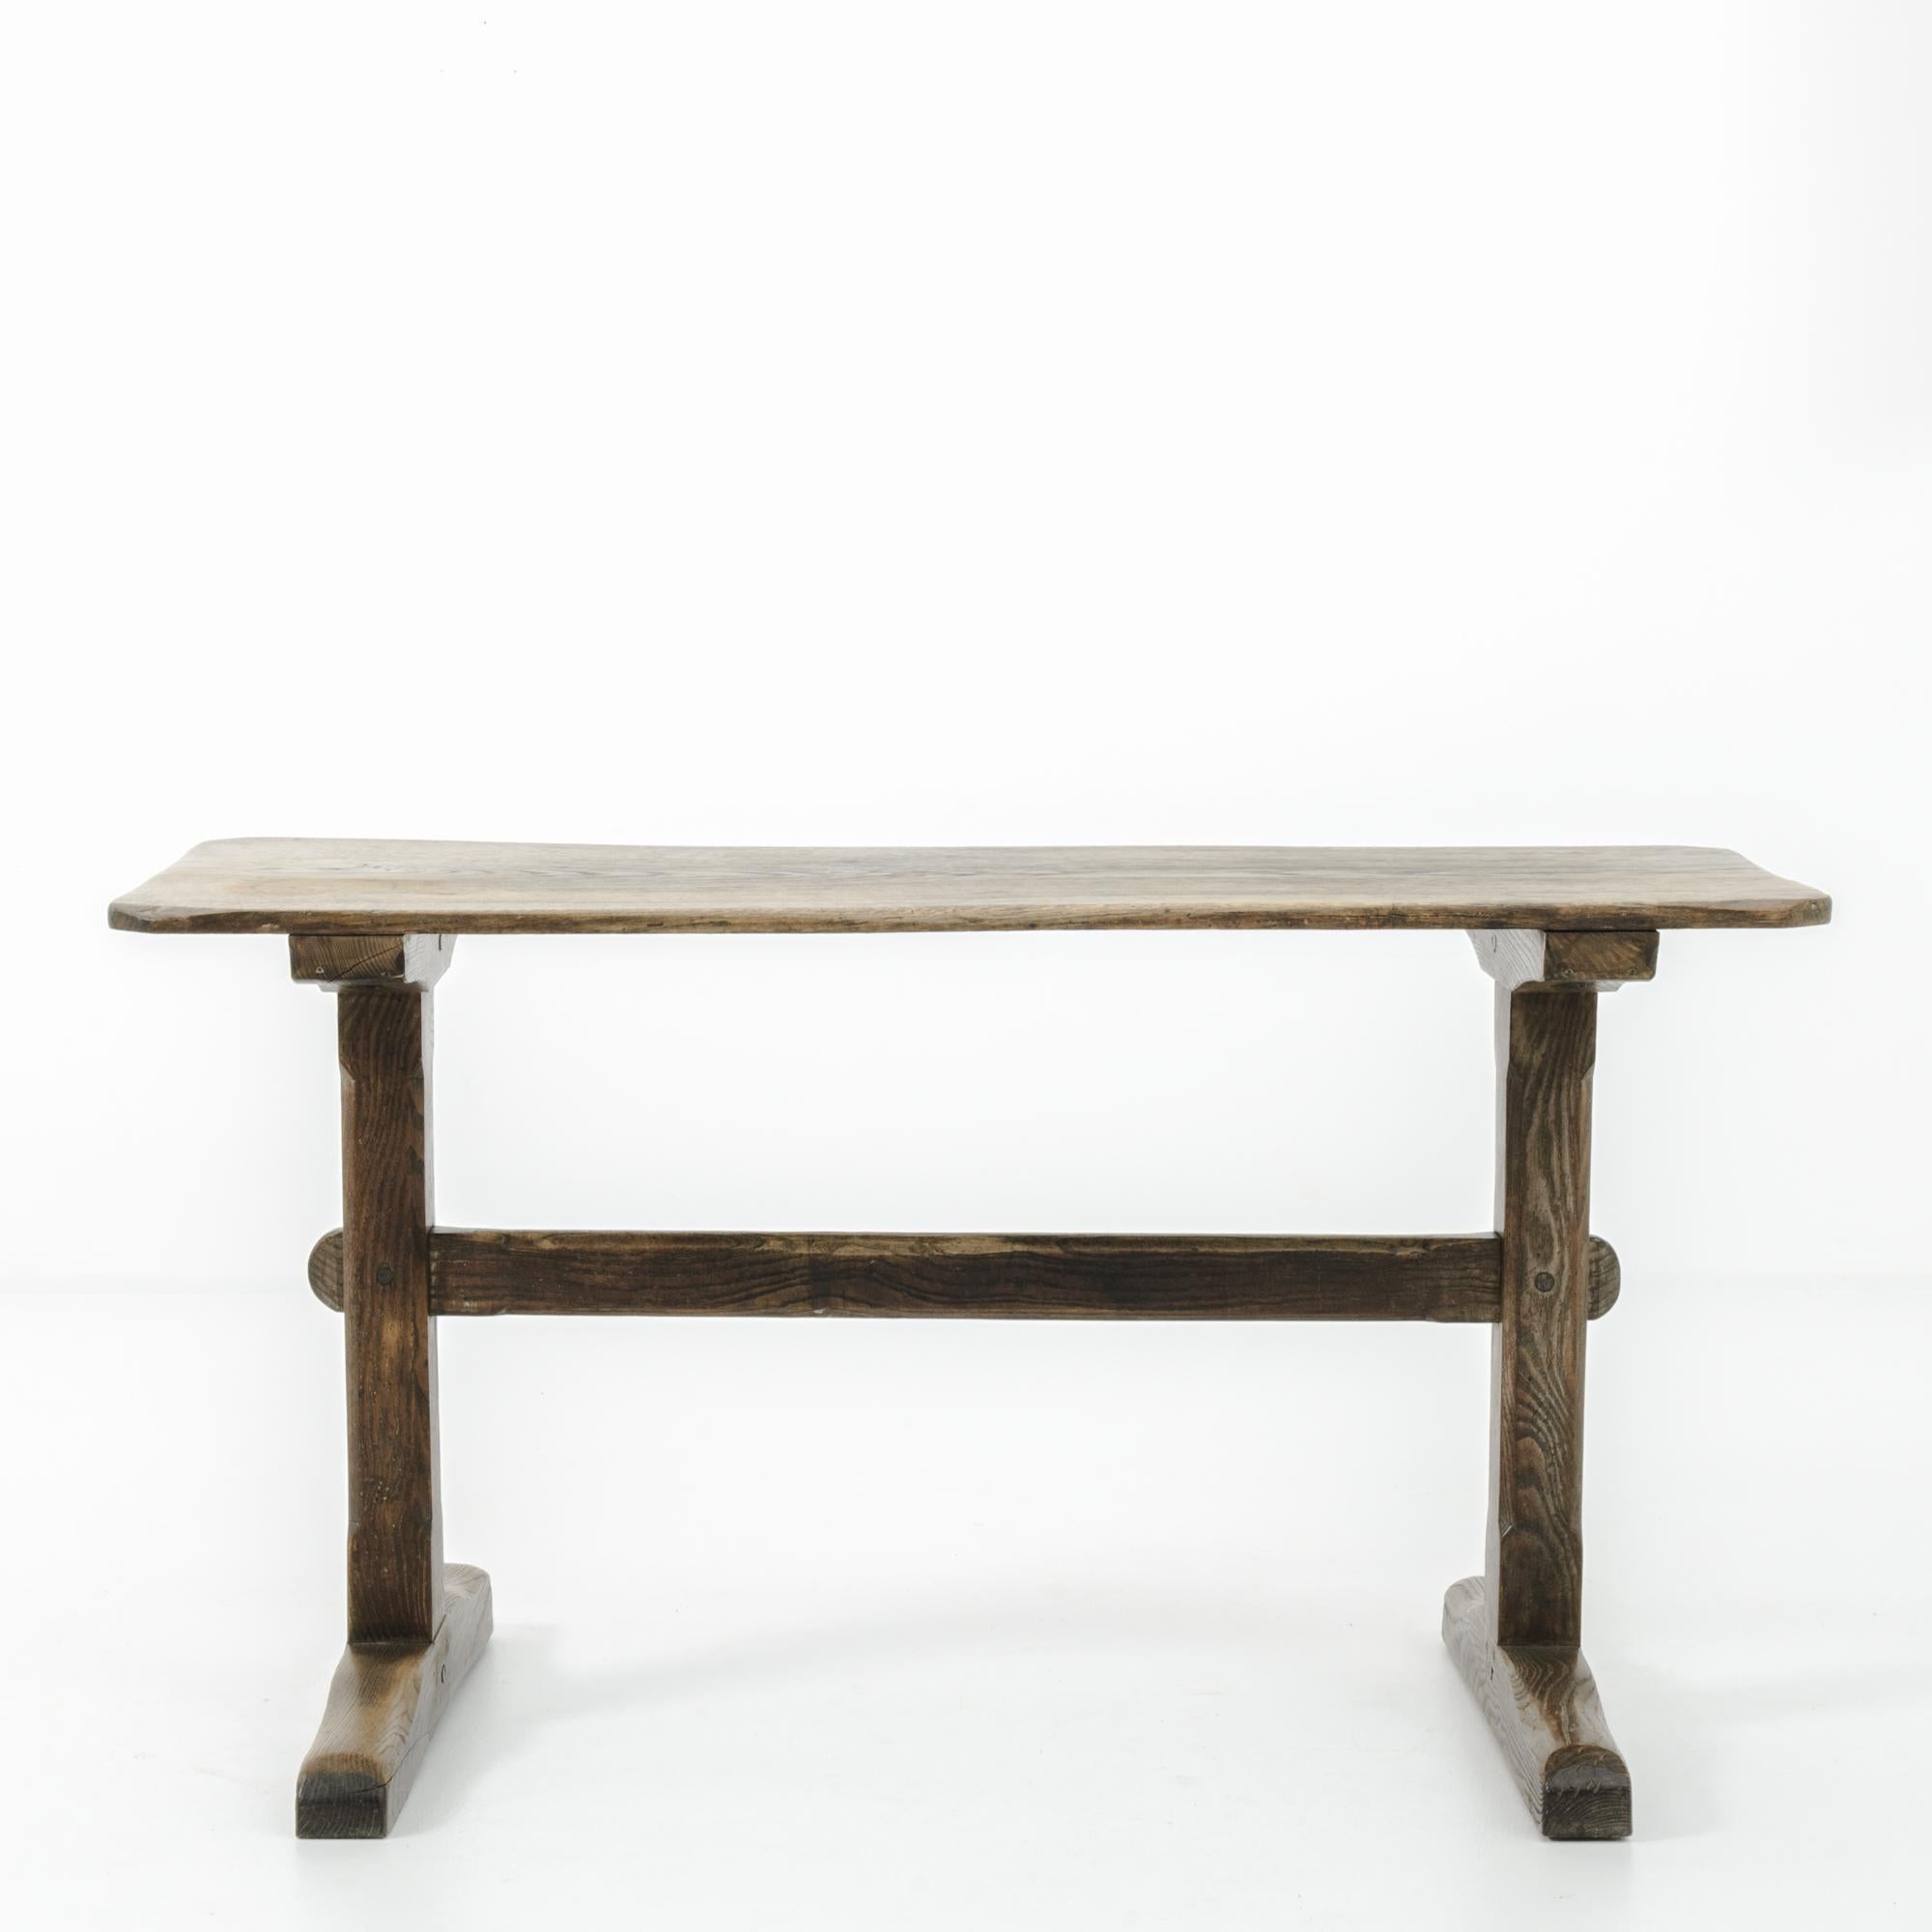 A rustic oak table from France, circa 1900. The silhouette is suggestive of a bistro or beer garden — a rough-hewn rectangular tabletop sits atop narrow trestle legs; wide feet provide a charming counterbalance. The wood is a dark brunette color,